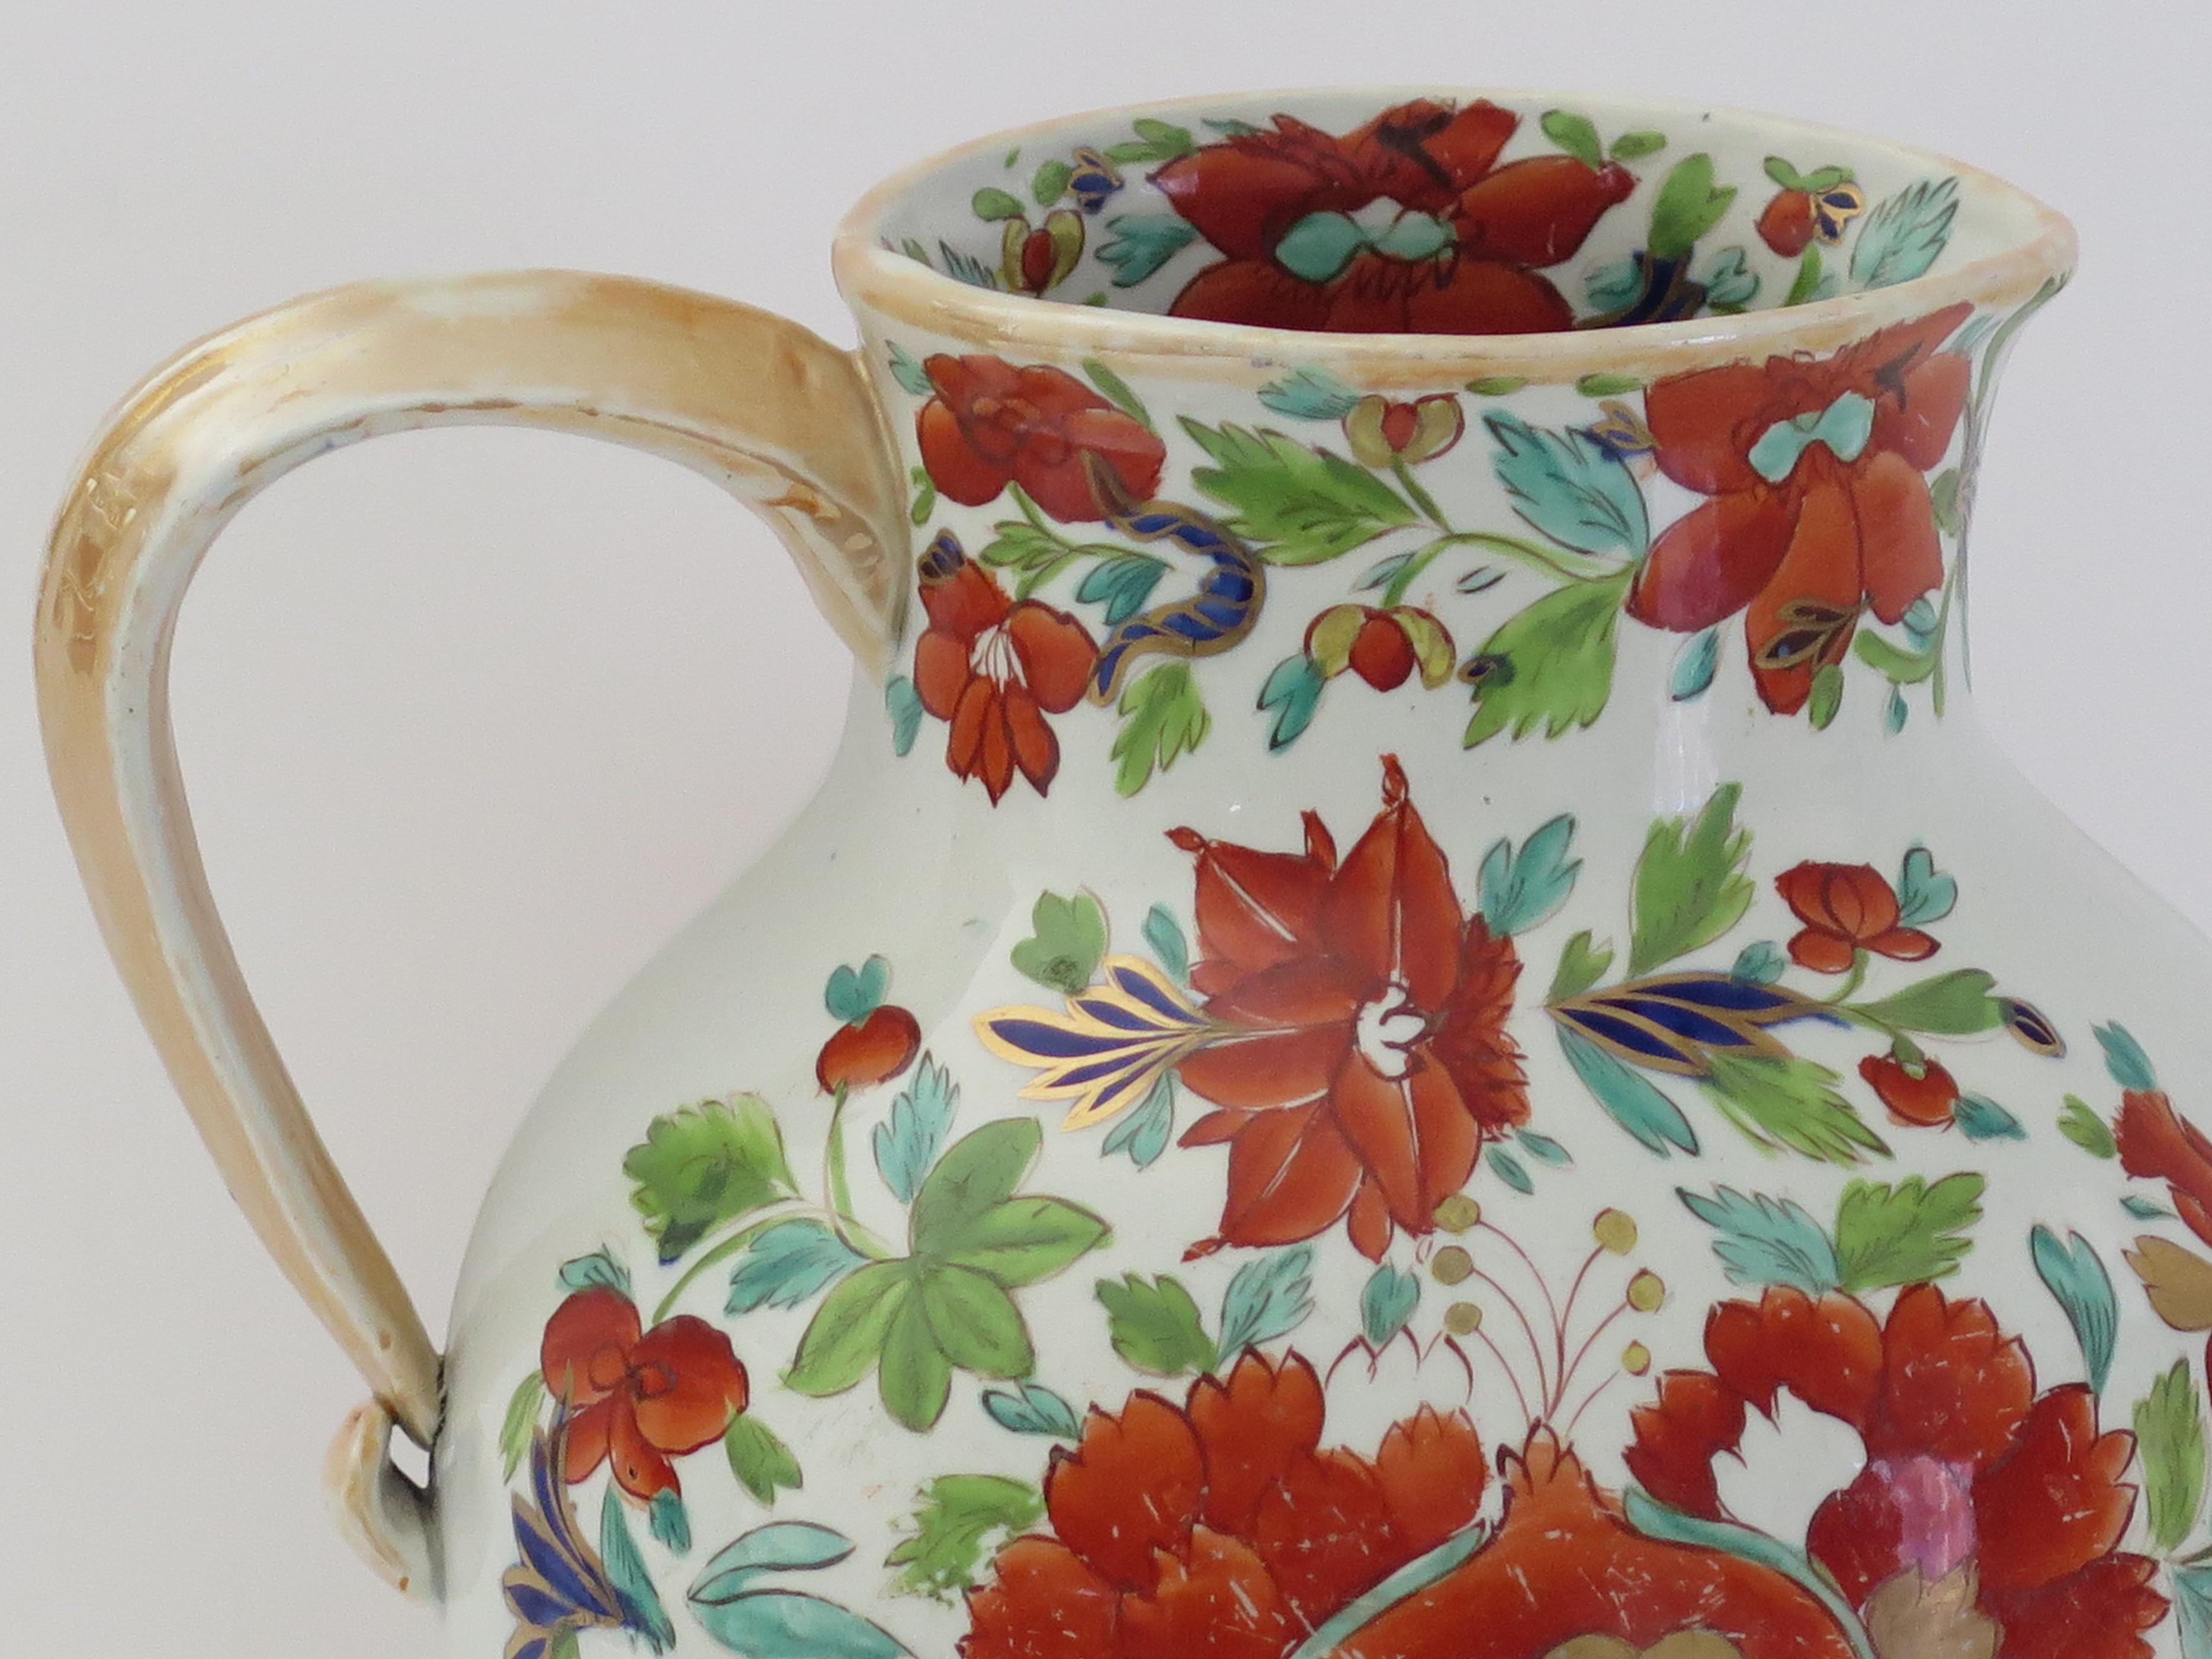 This is a rare very early large jug or pitcher in one of the rarer shapes, hand painted in the large stamen flower pattern, made by Mason's Ironstone, Lane Delph, England and dating to circa 1813-1820.

The large Jug or pitcher is well potted with